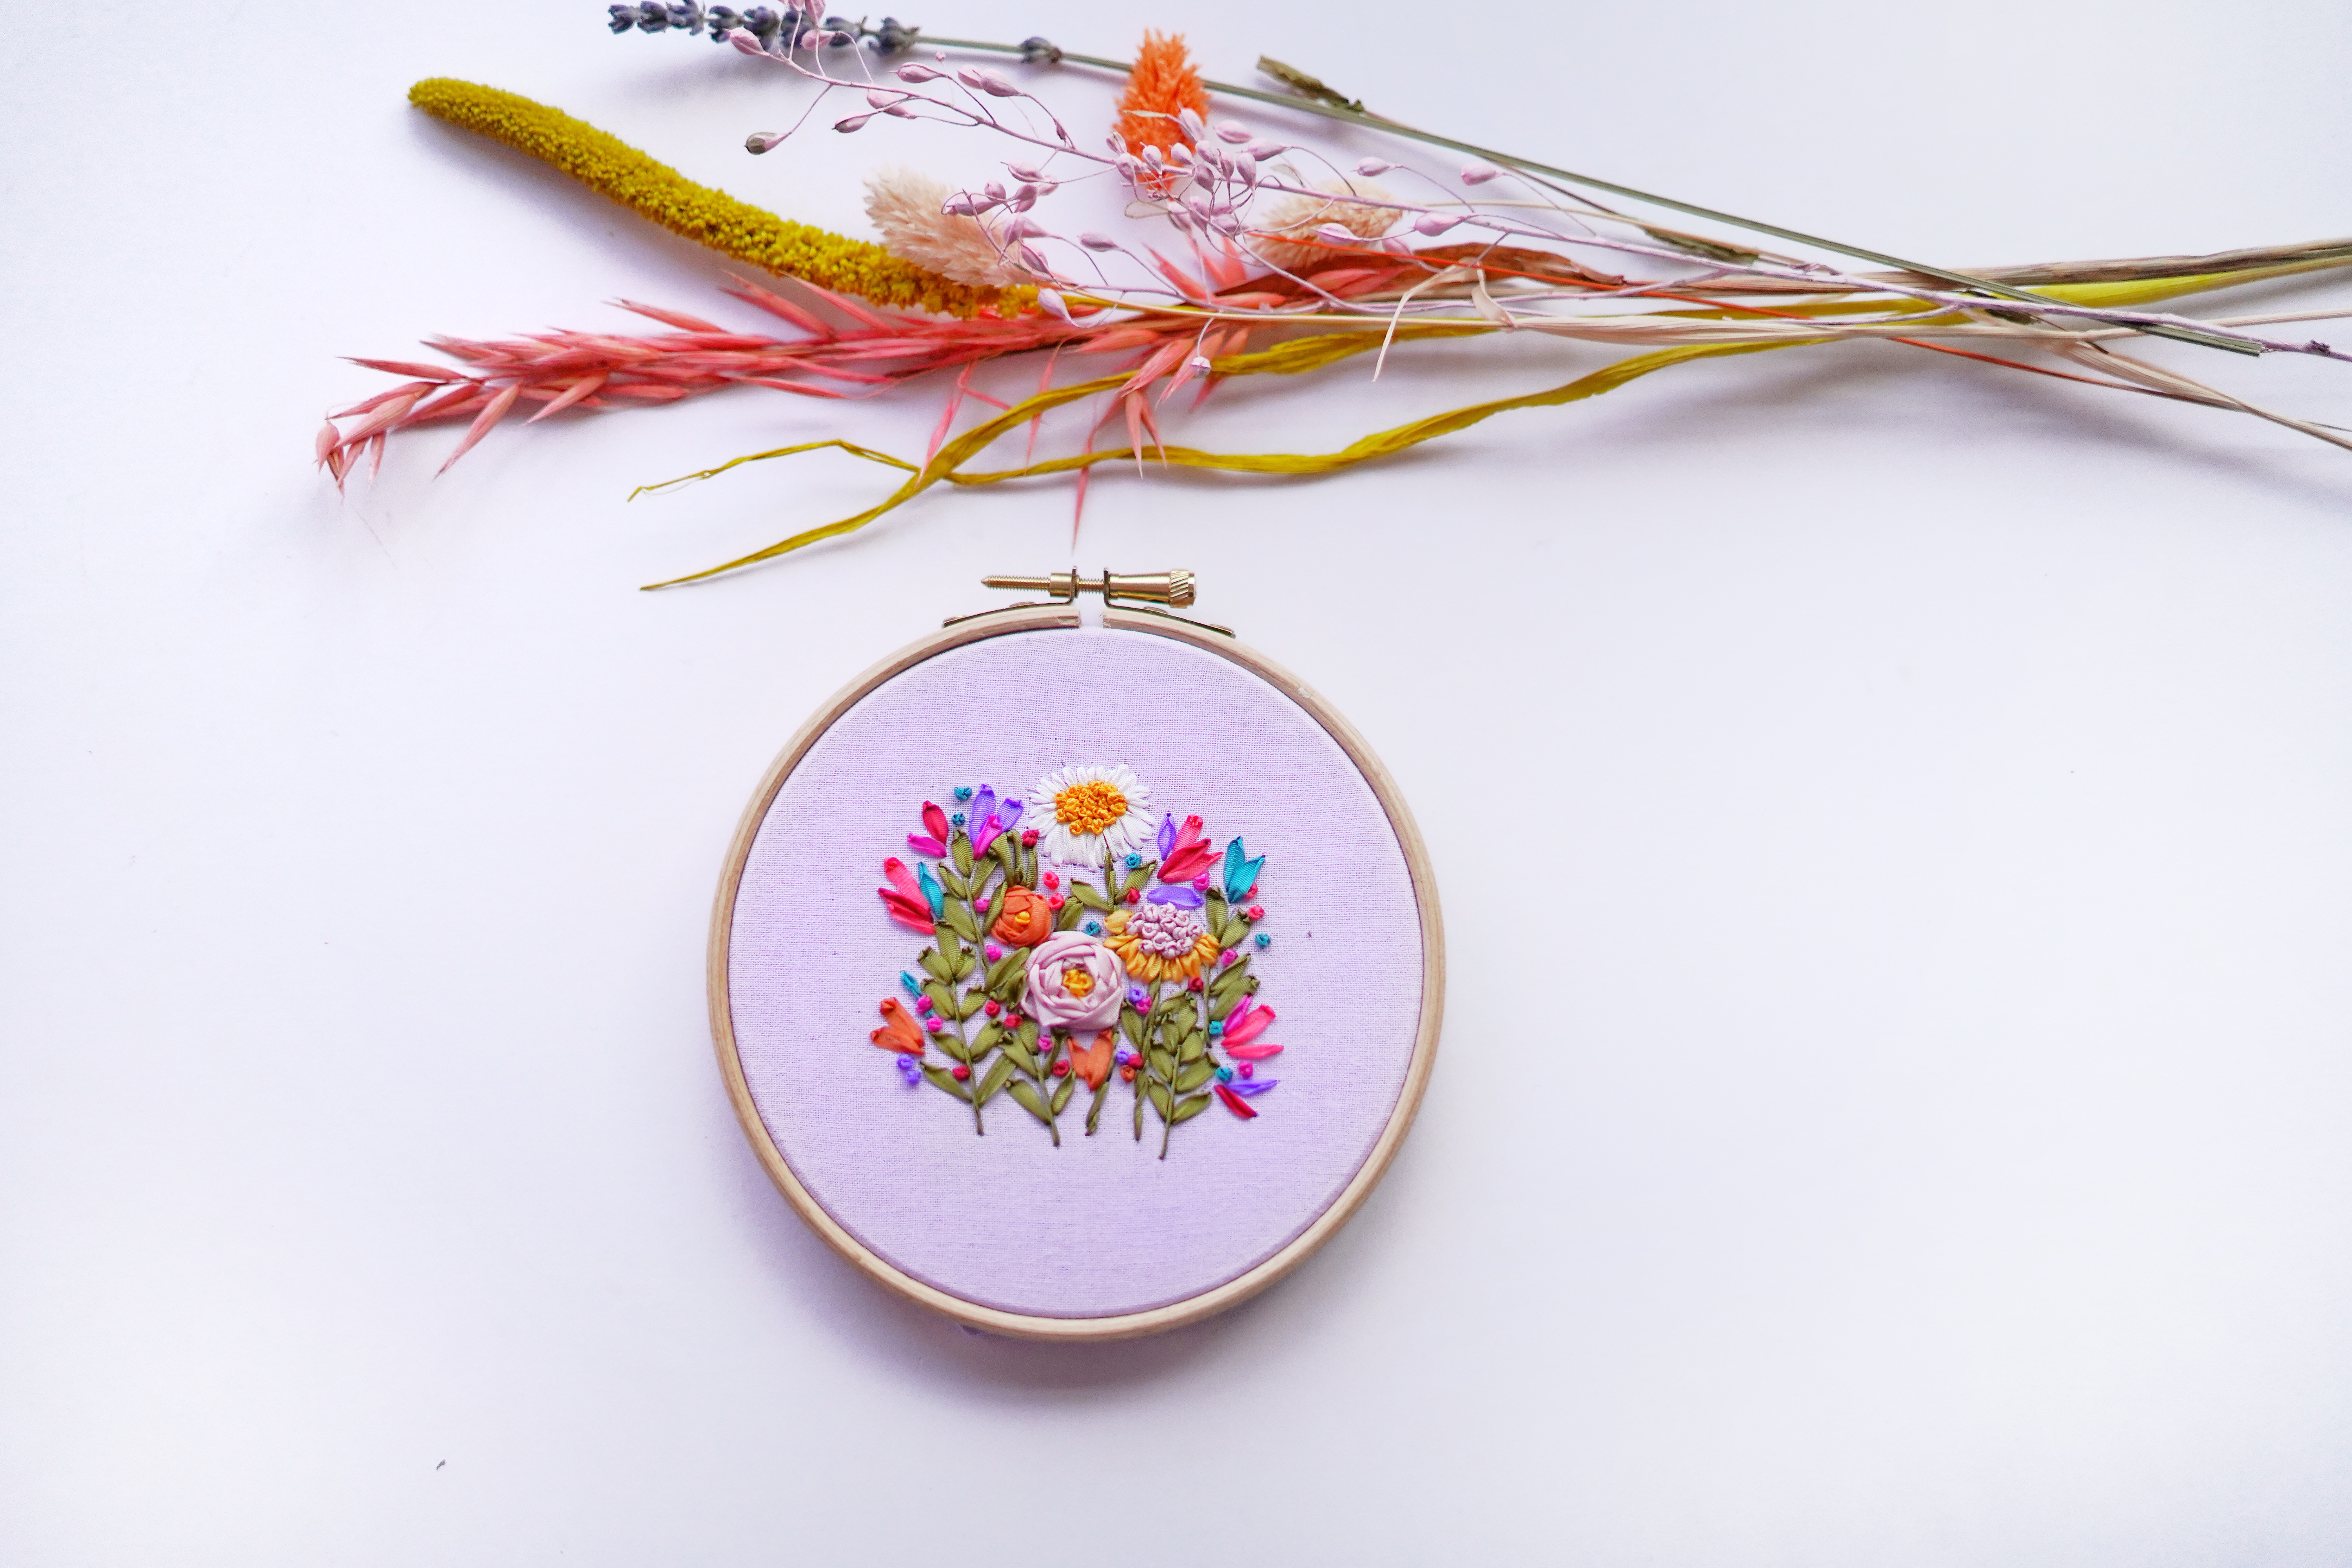 Rose Embroidery: A New Project That'll Make Your Day